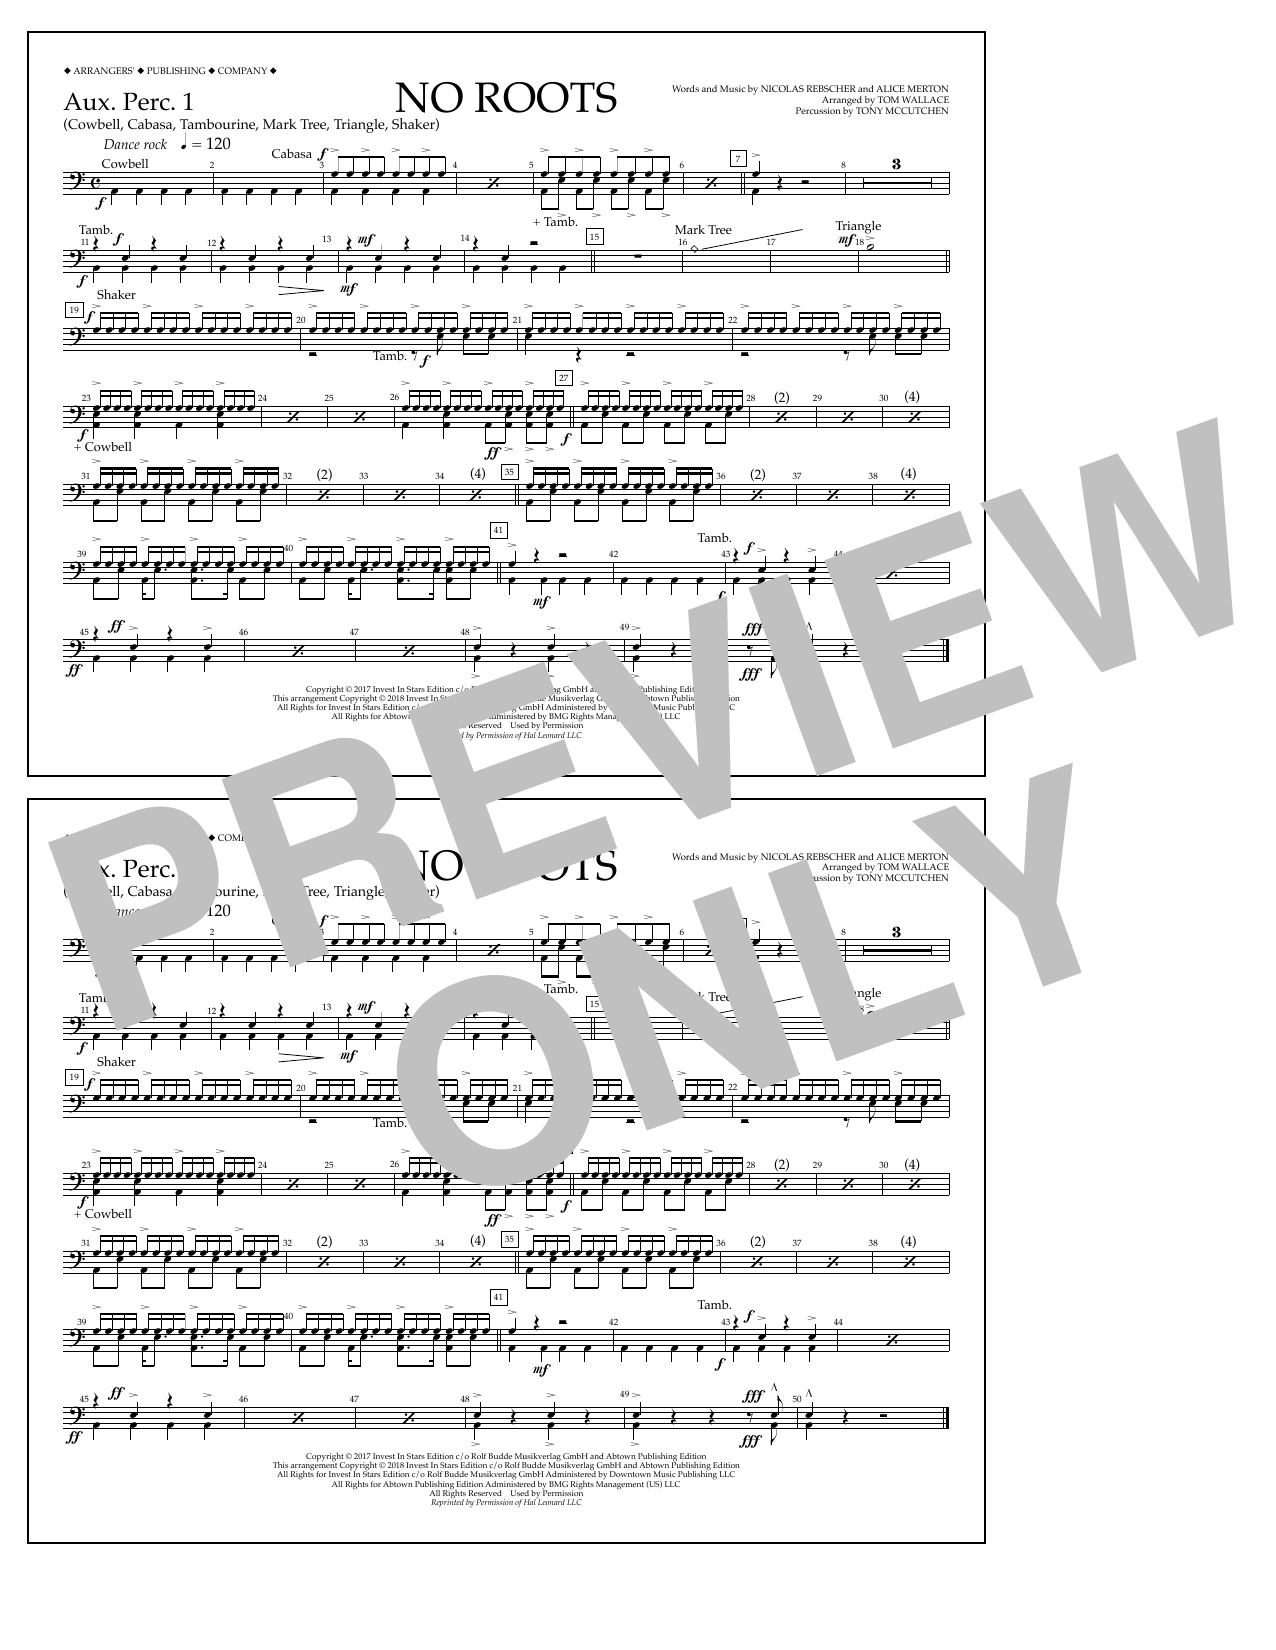 Download Tom Wallace No Roots - Aux. Perc. 1 Sheet Music